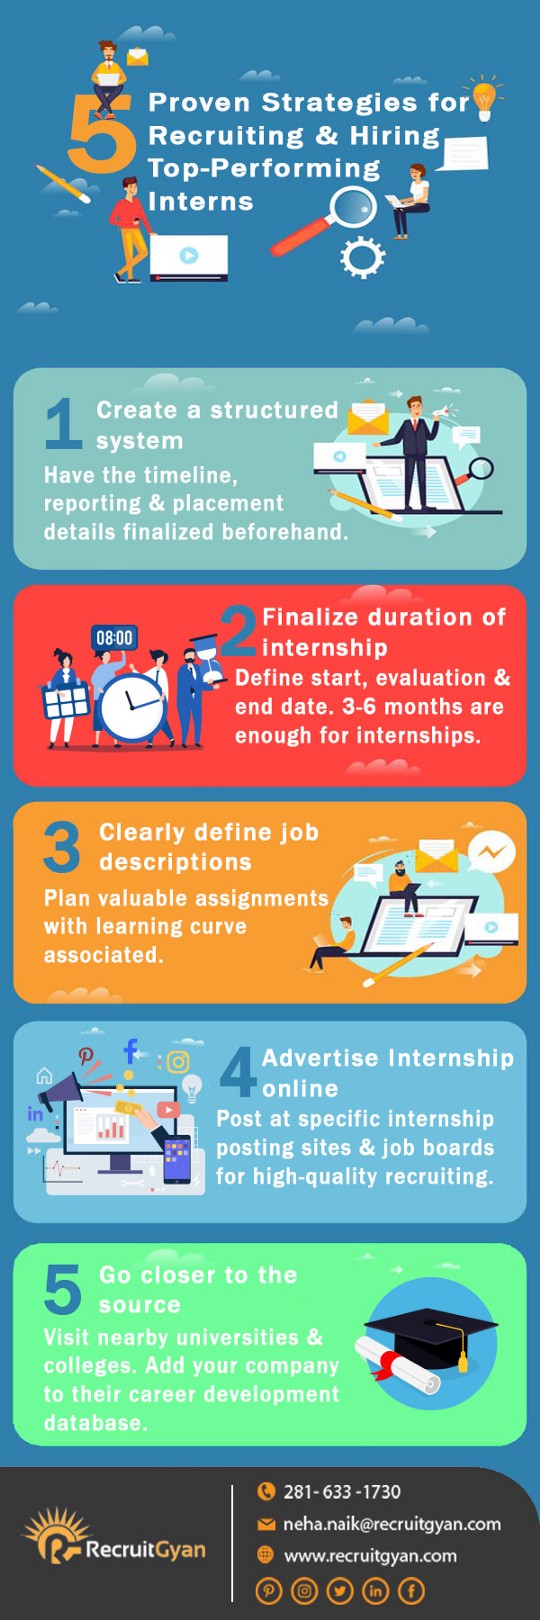 Strategies for Recruiting & Hiring Top-Performing Interns